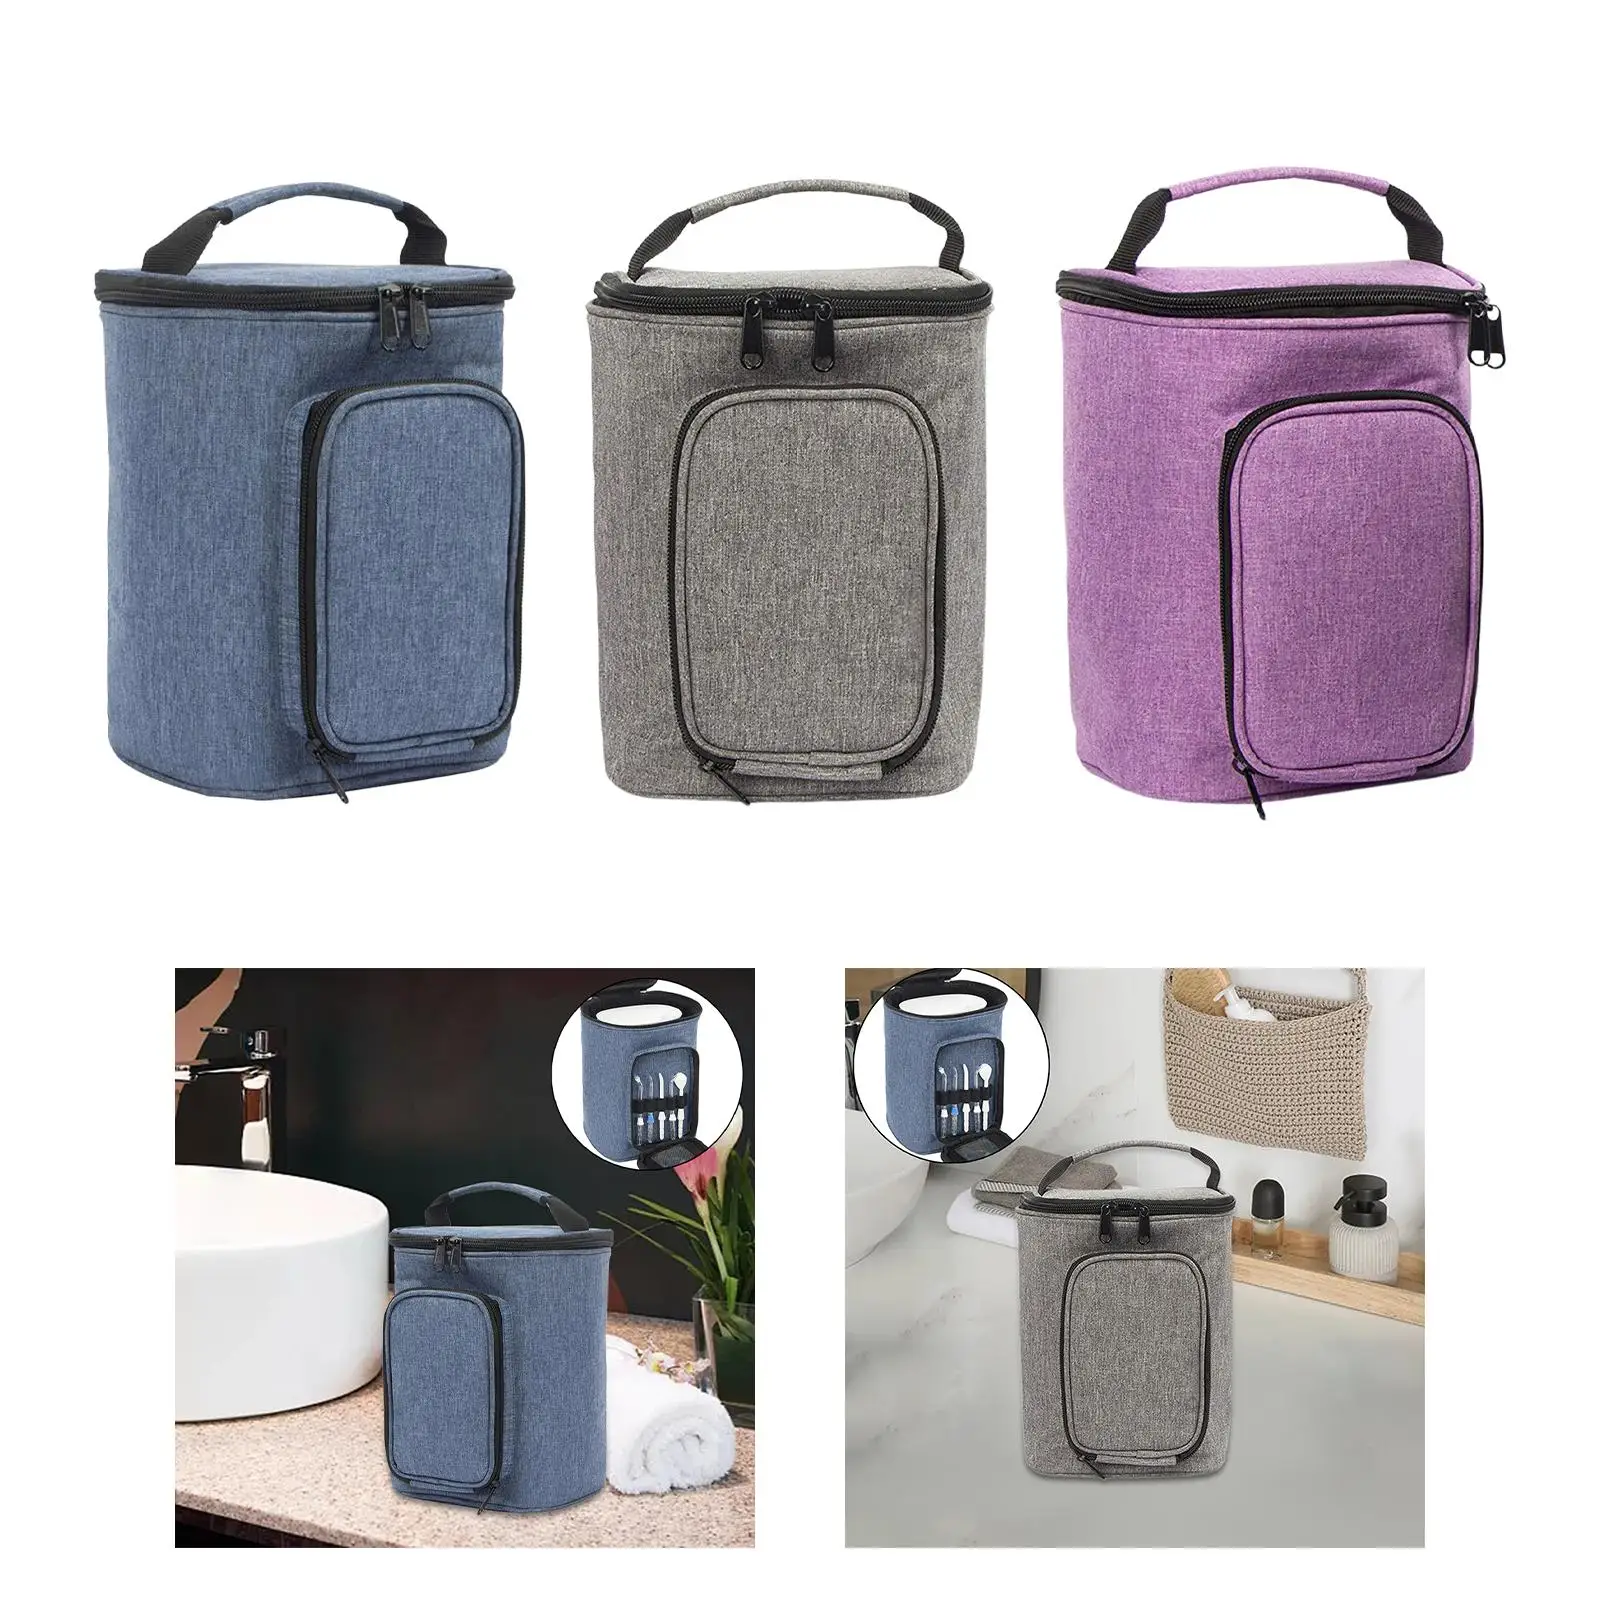 Water Flosser Storage Bag Home Travel Use Accessory Containers Strong Sturdy Carry Handle Carrying Storage Bag for Water Flosser